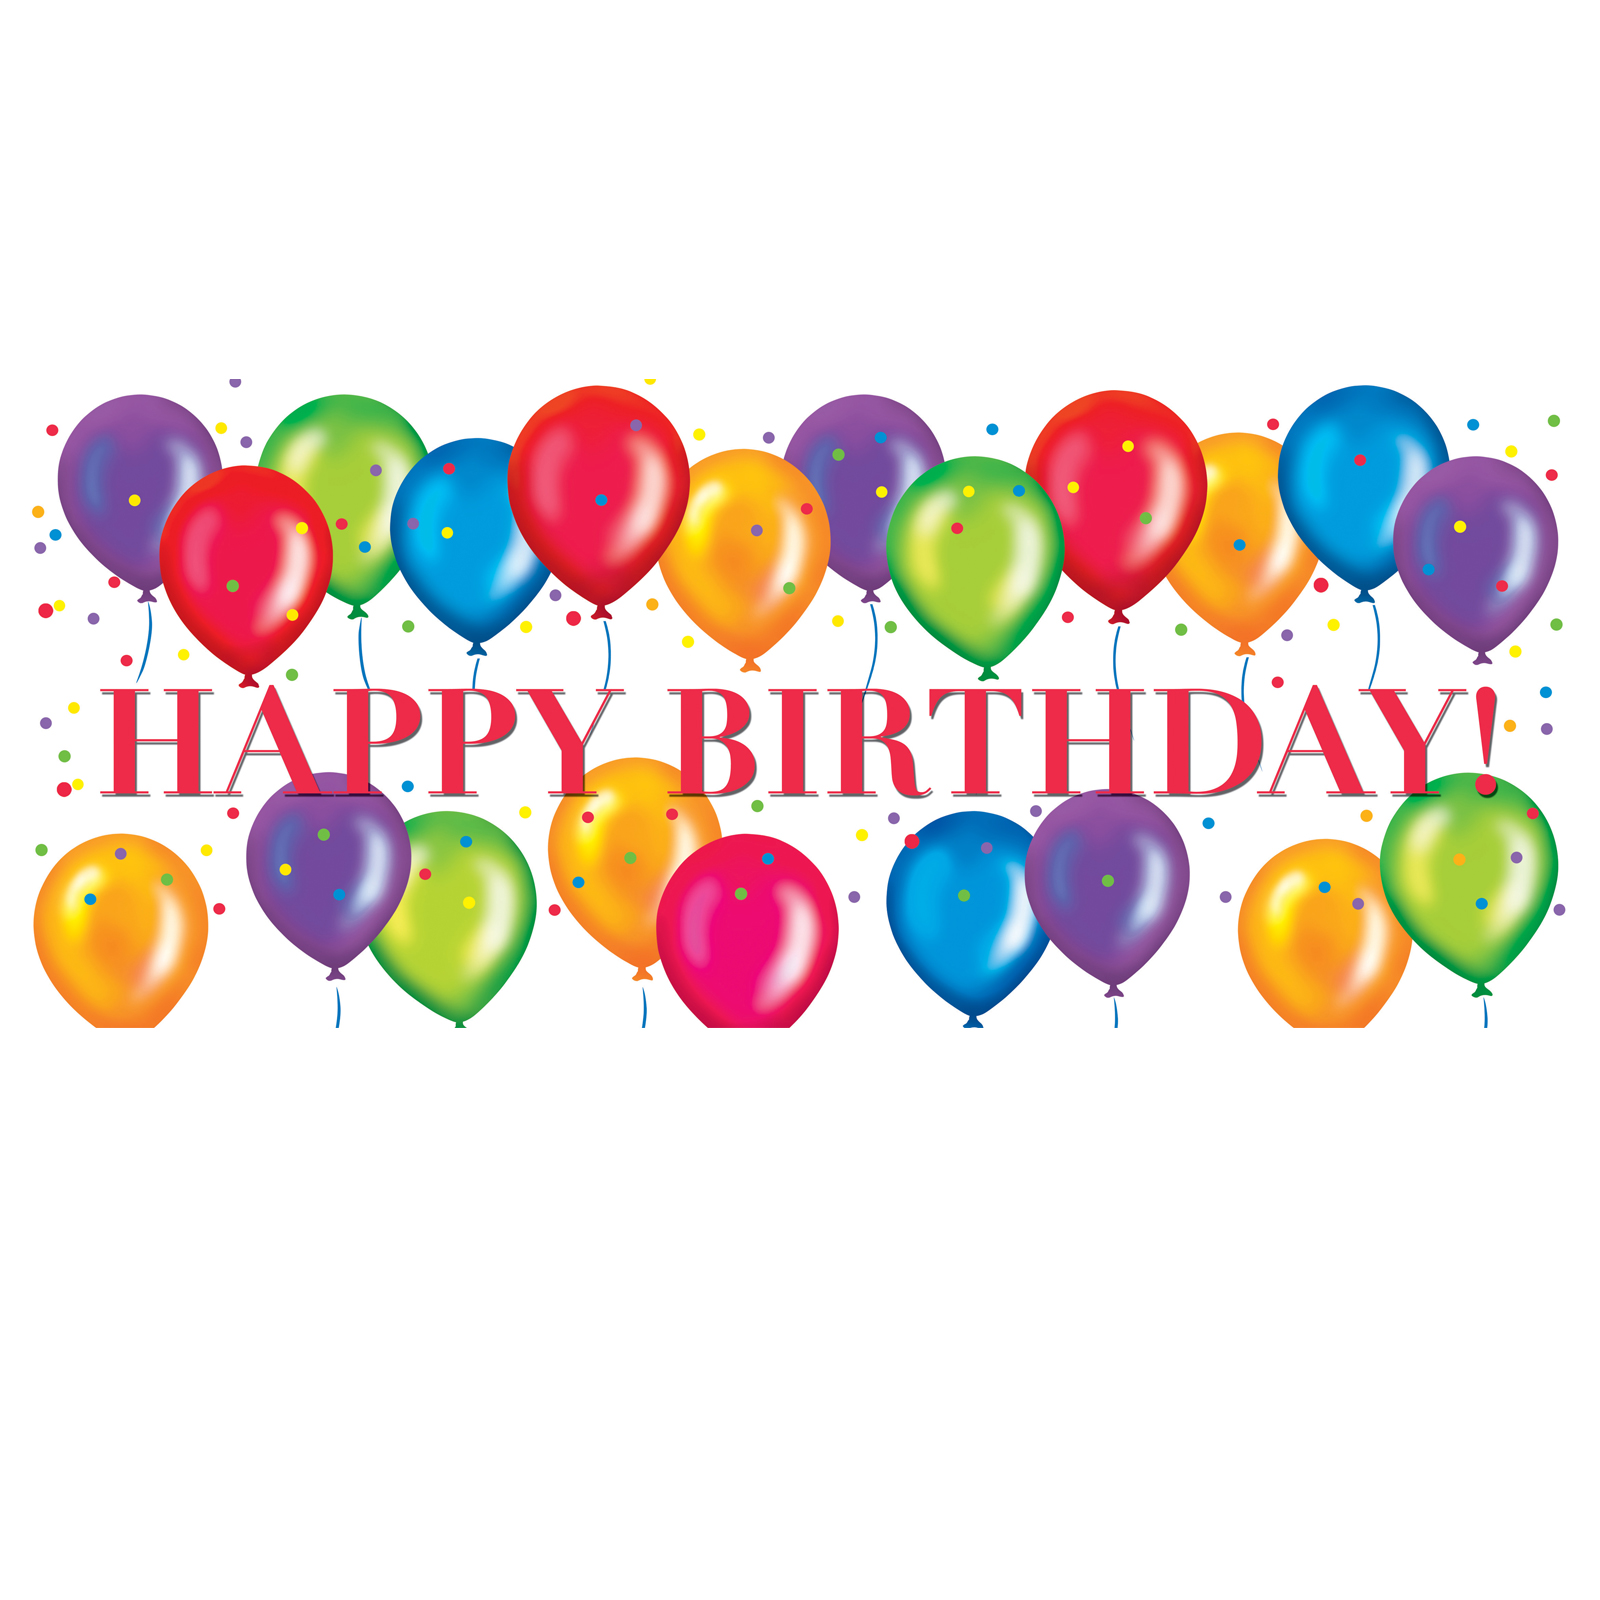 Happy Birthday Balloons Clipart | Clipart Panda - Free Clipart Images